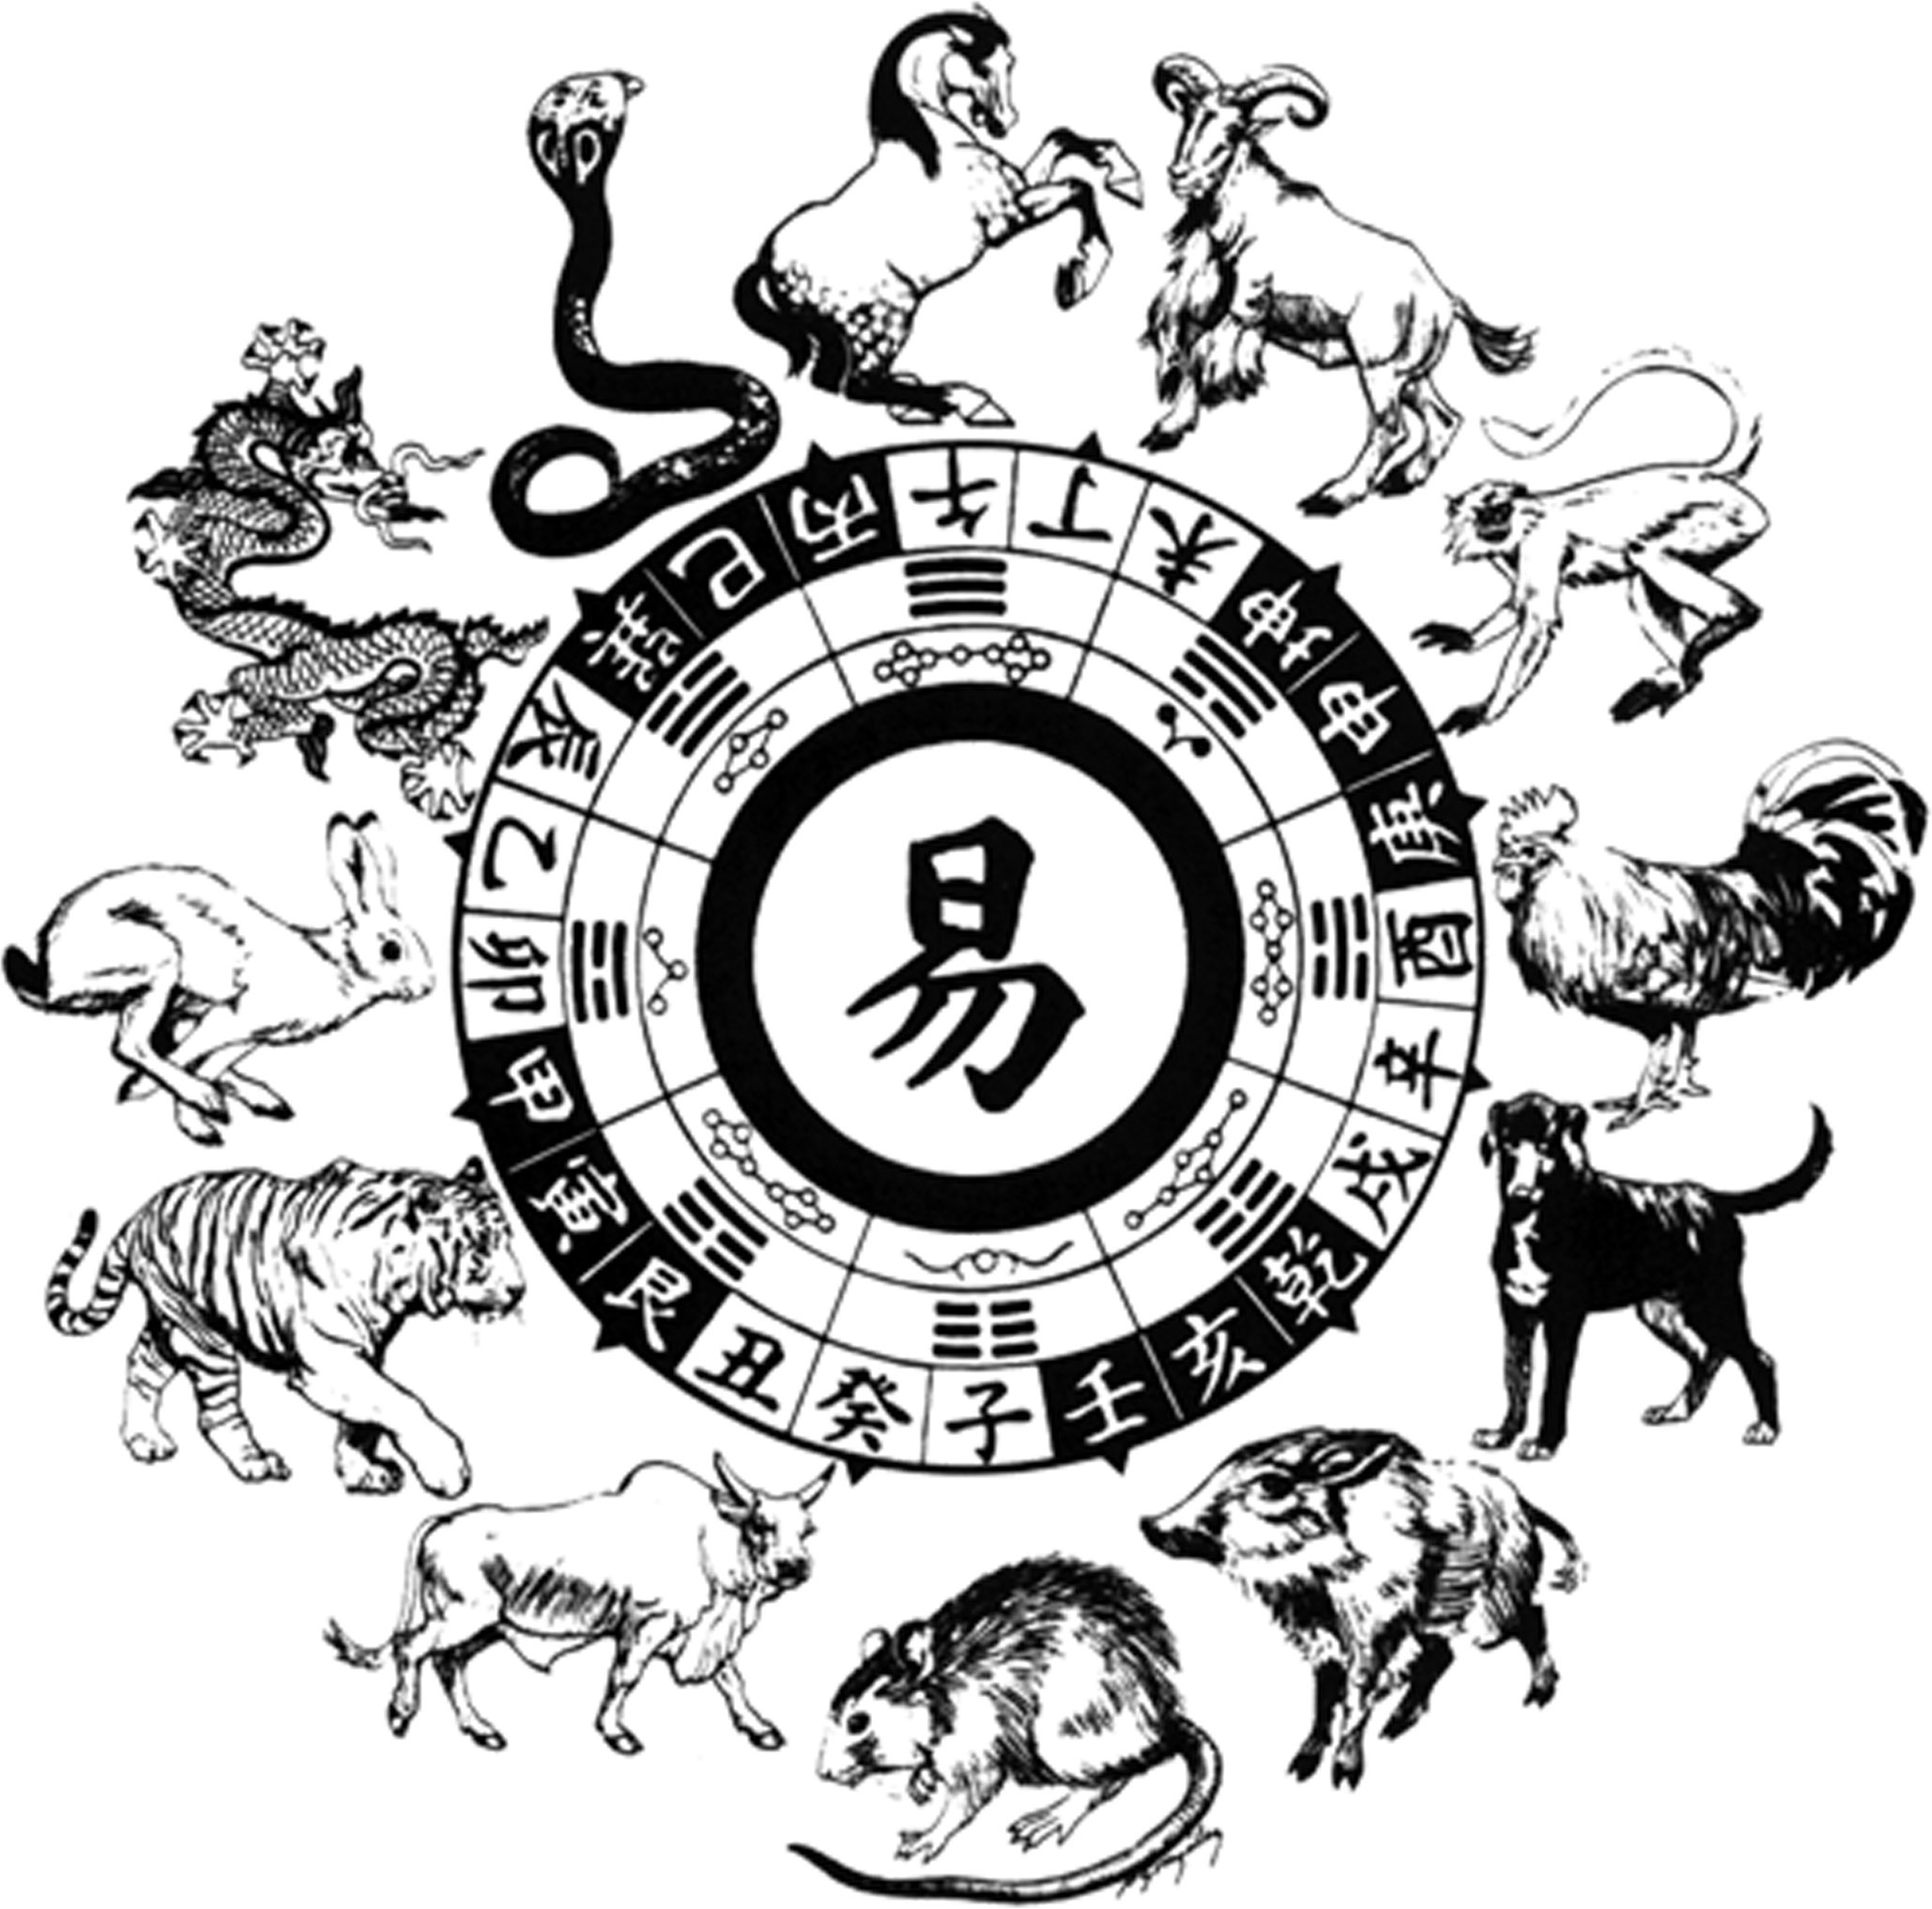 what year 1975 in chinese astrology